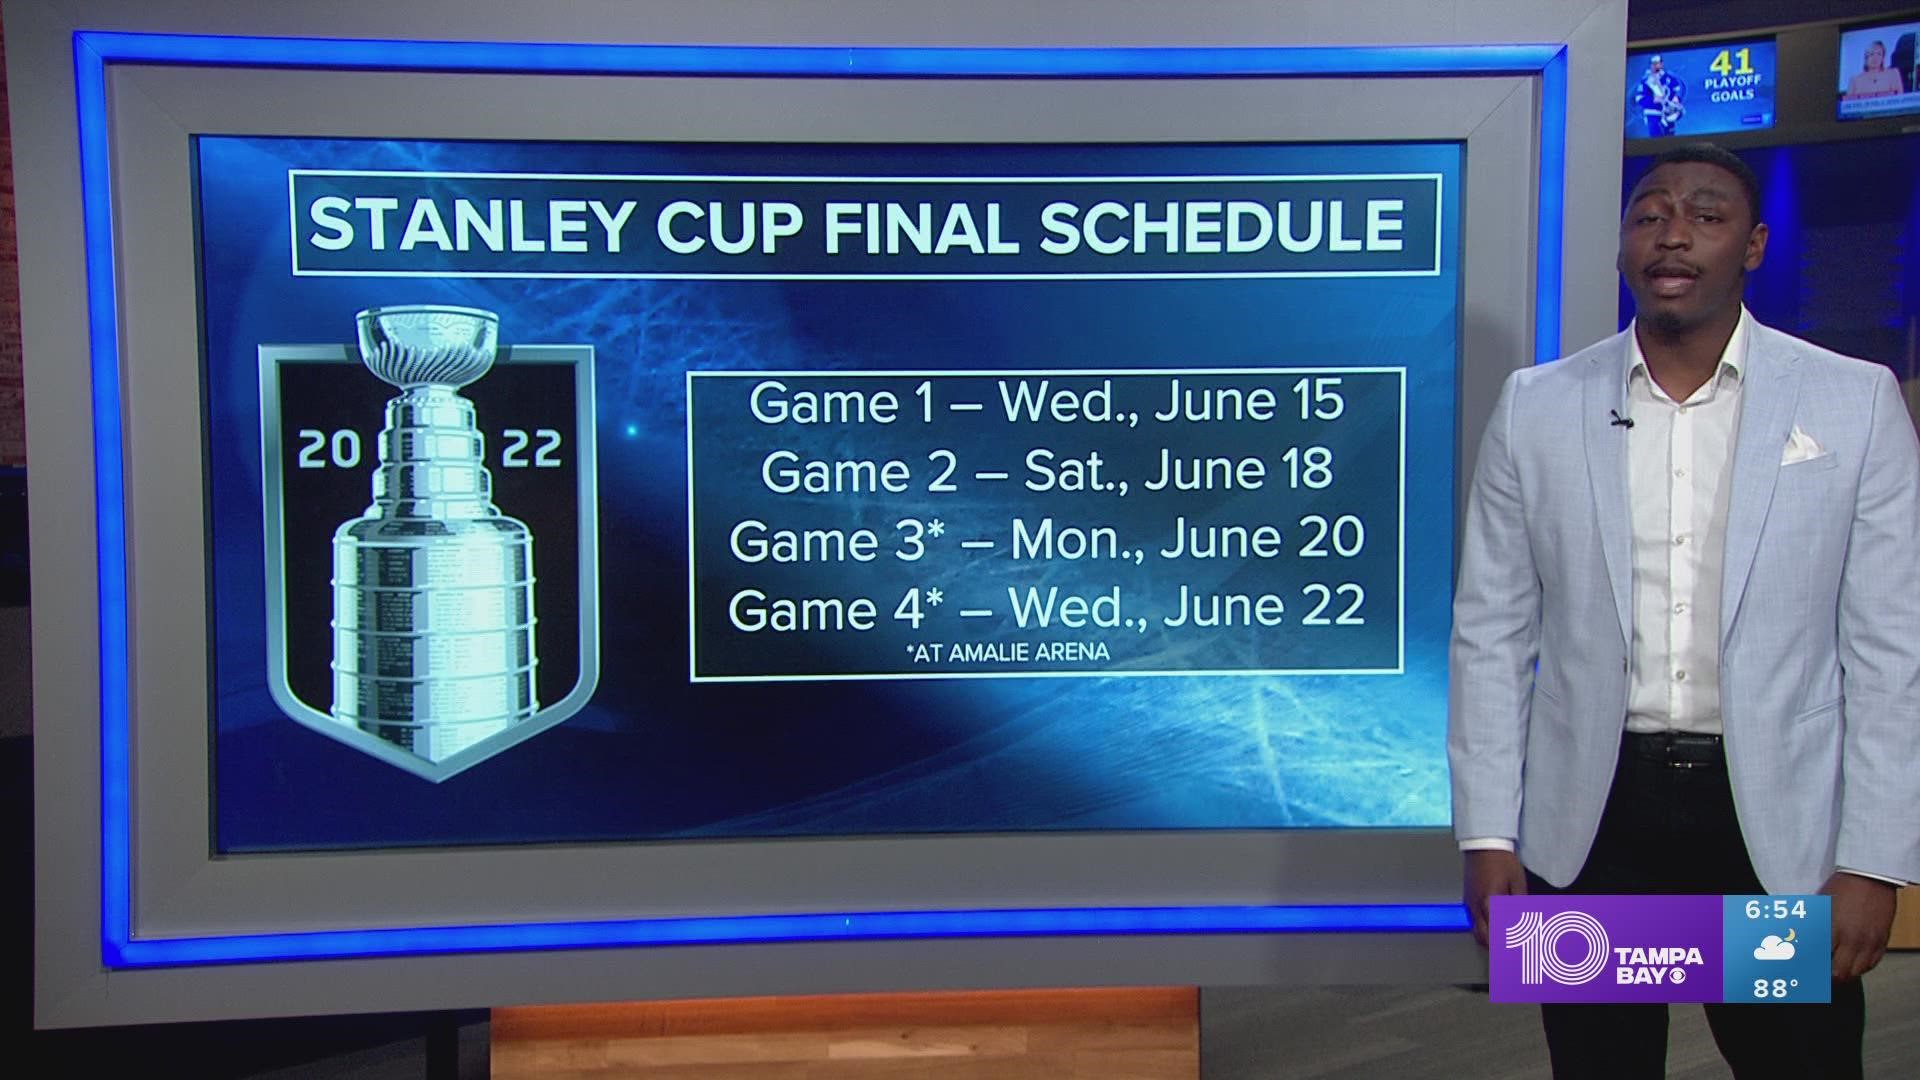 Tampa Bay will play Game 1 away in Denver on Wednesday, June 15.